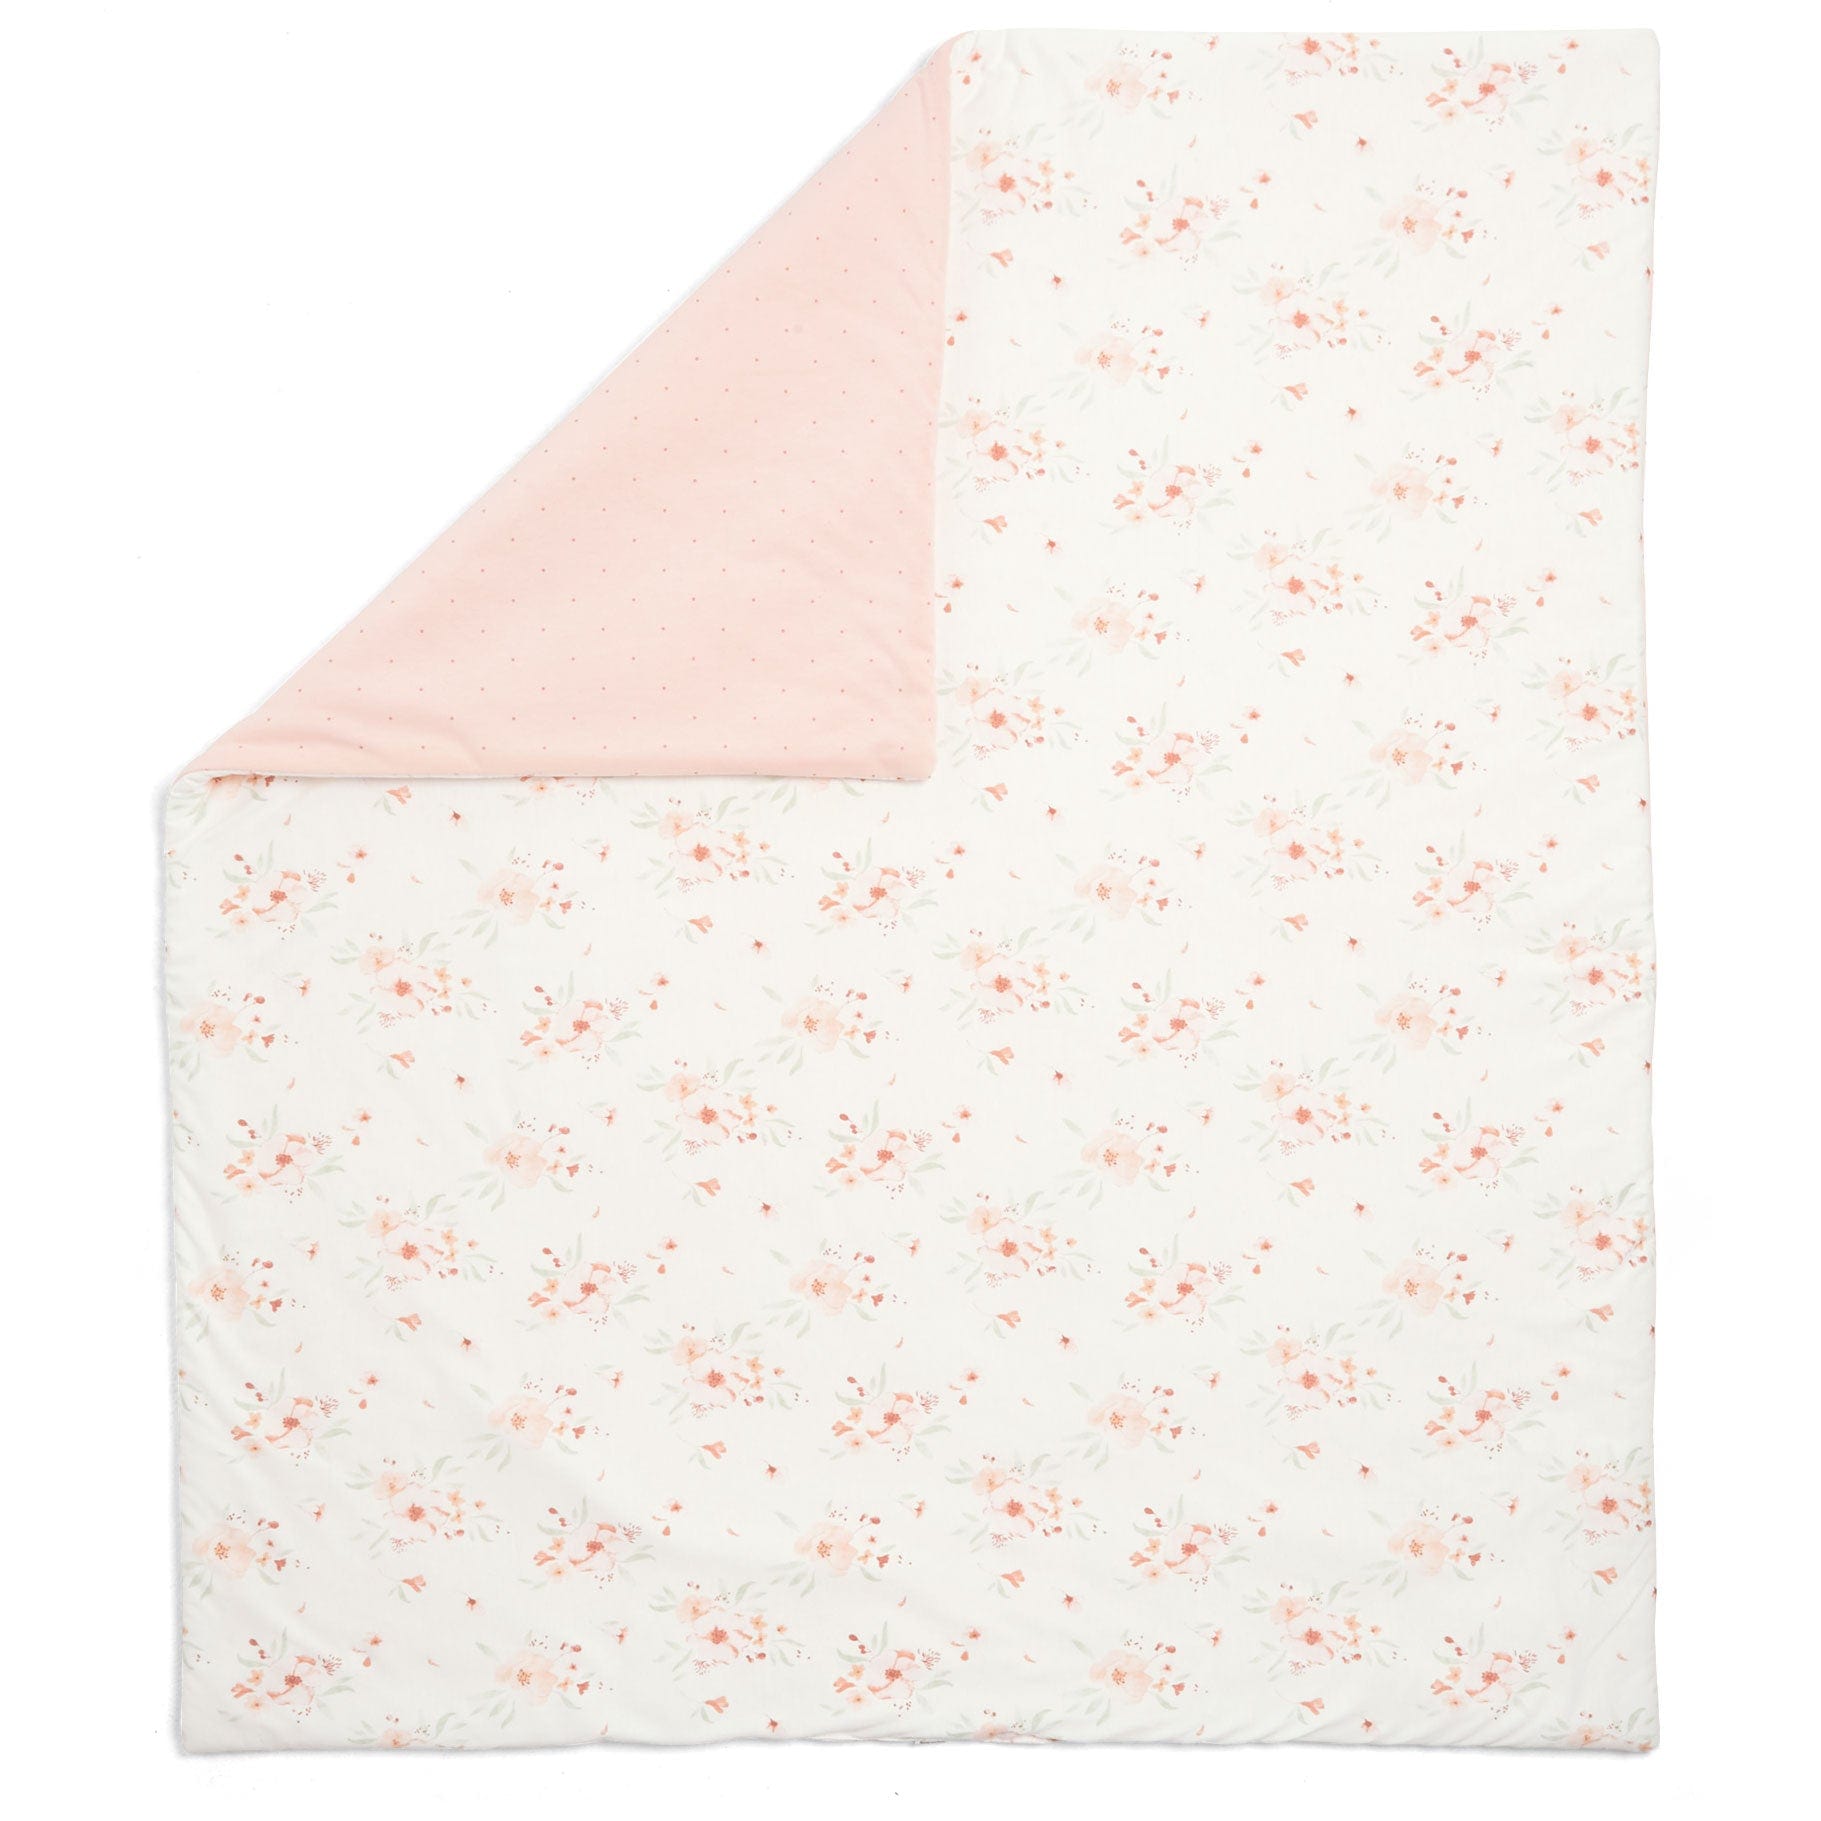 Mamas & Papas Cot & Cot Bed Quilts M&P Welcome to the World Cot Bed Quilt (Floral Spot) 7233X1600